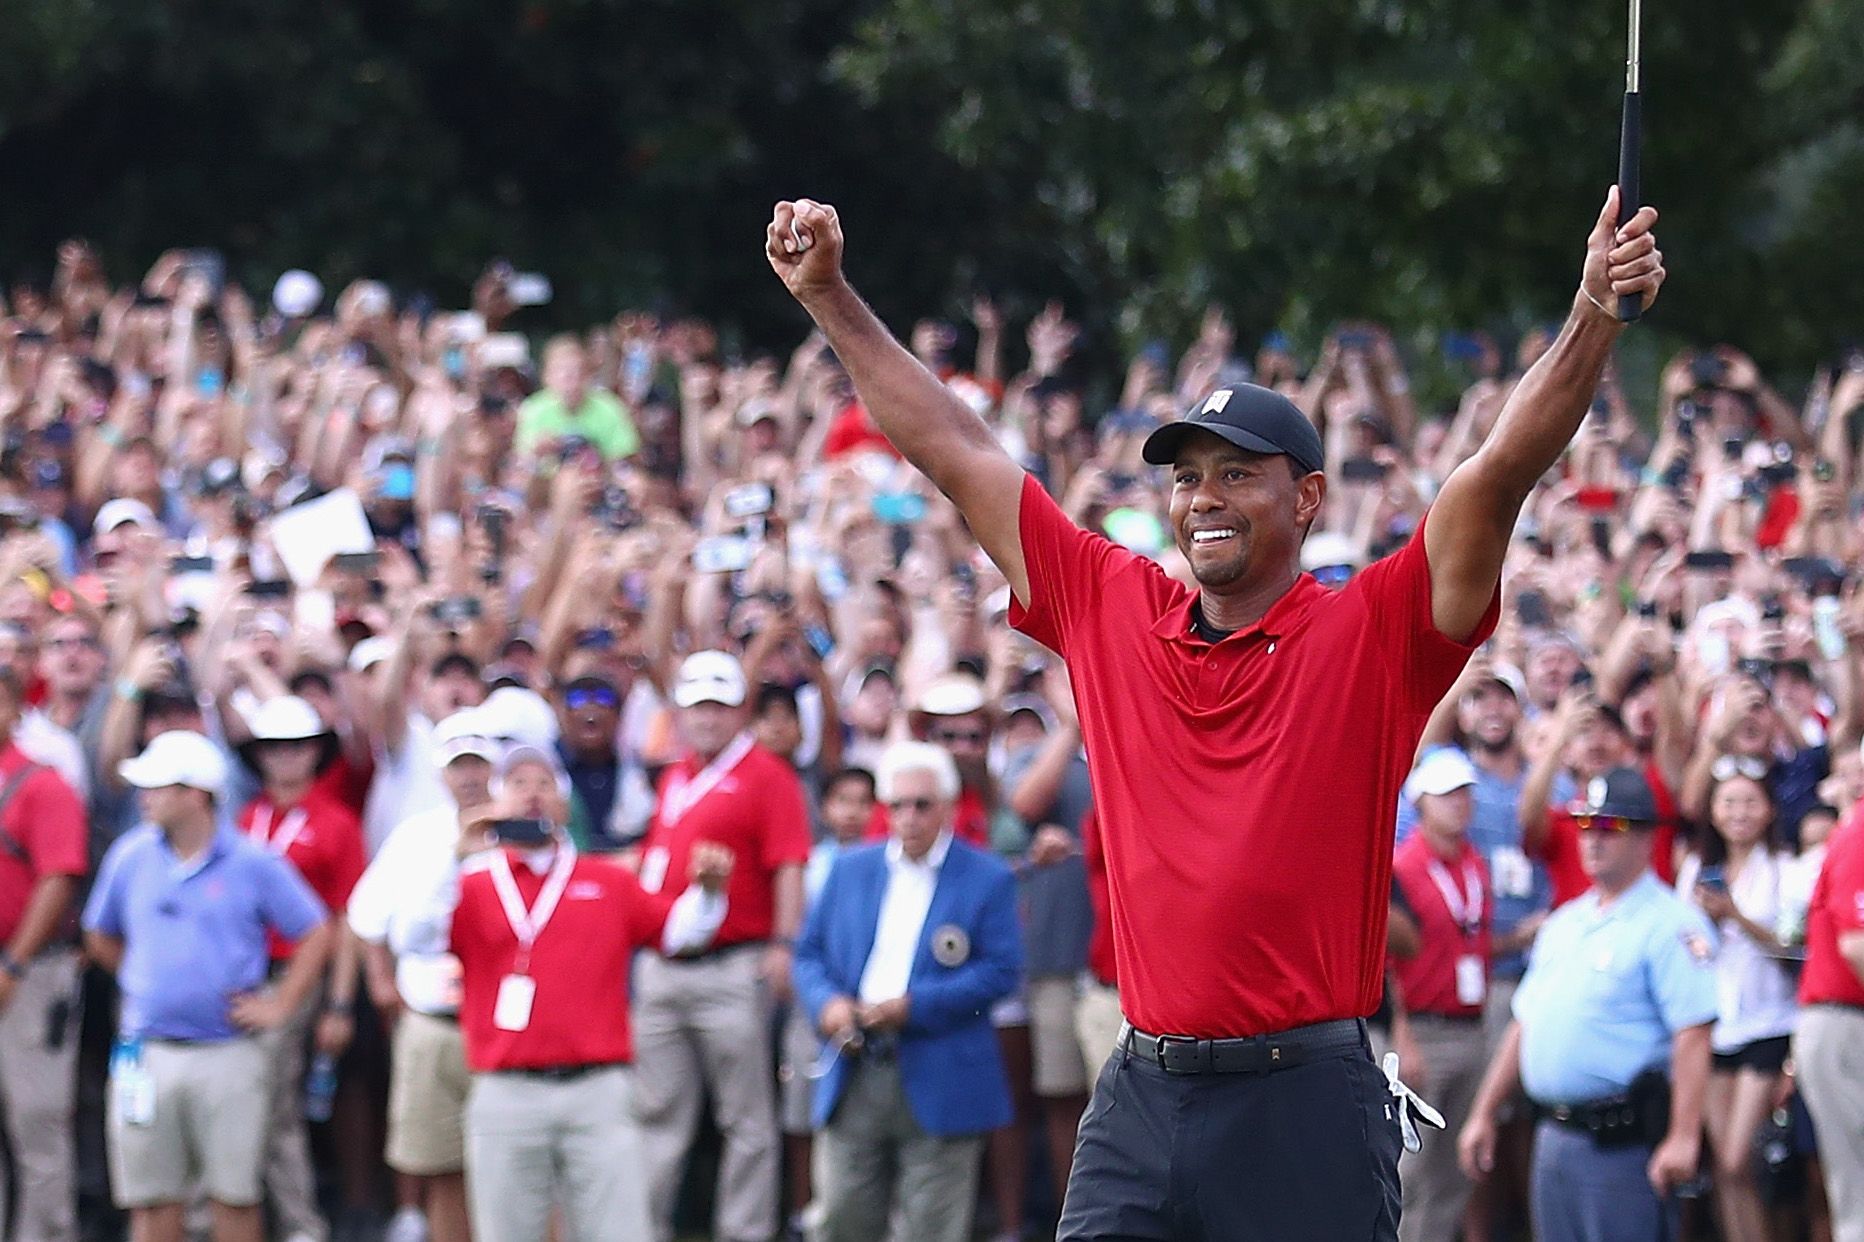 Tiger Woods 'expected' to win again, says agent Mark Steinberg